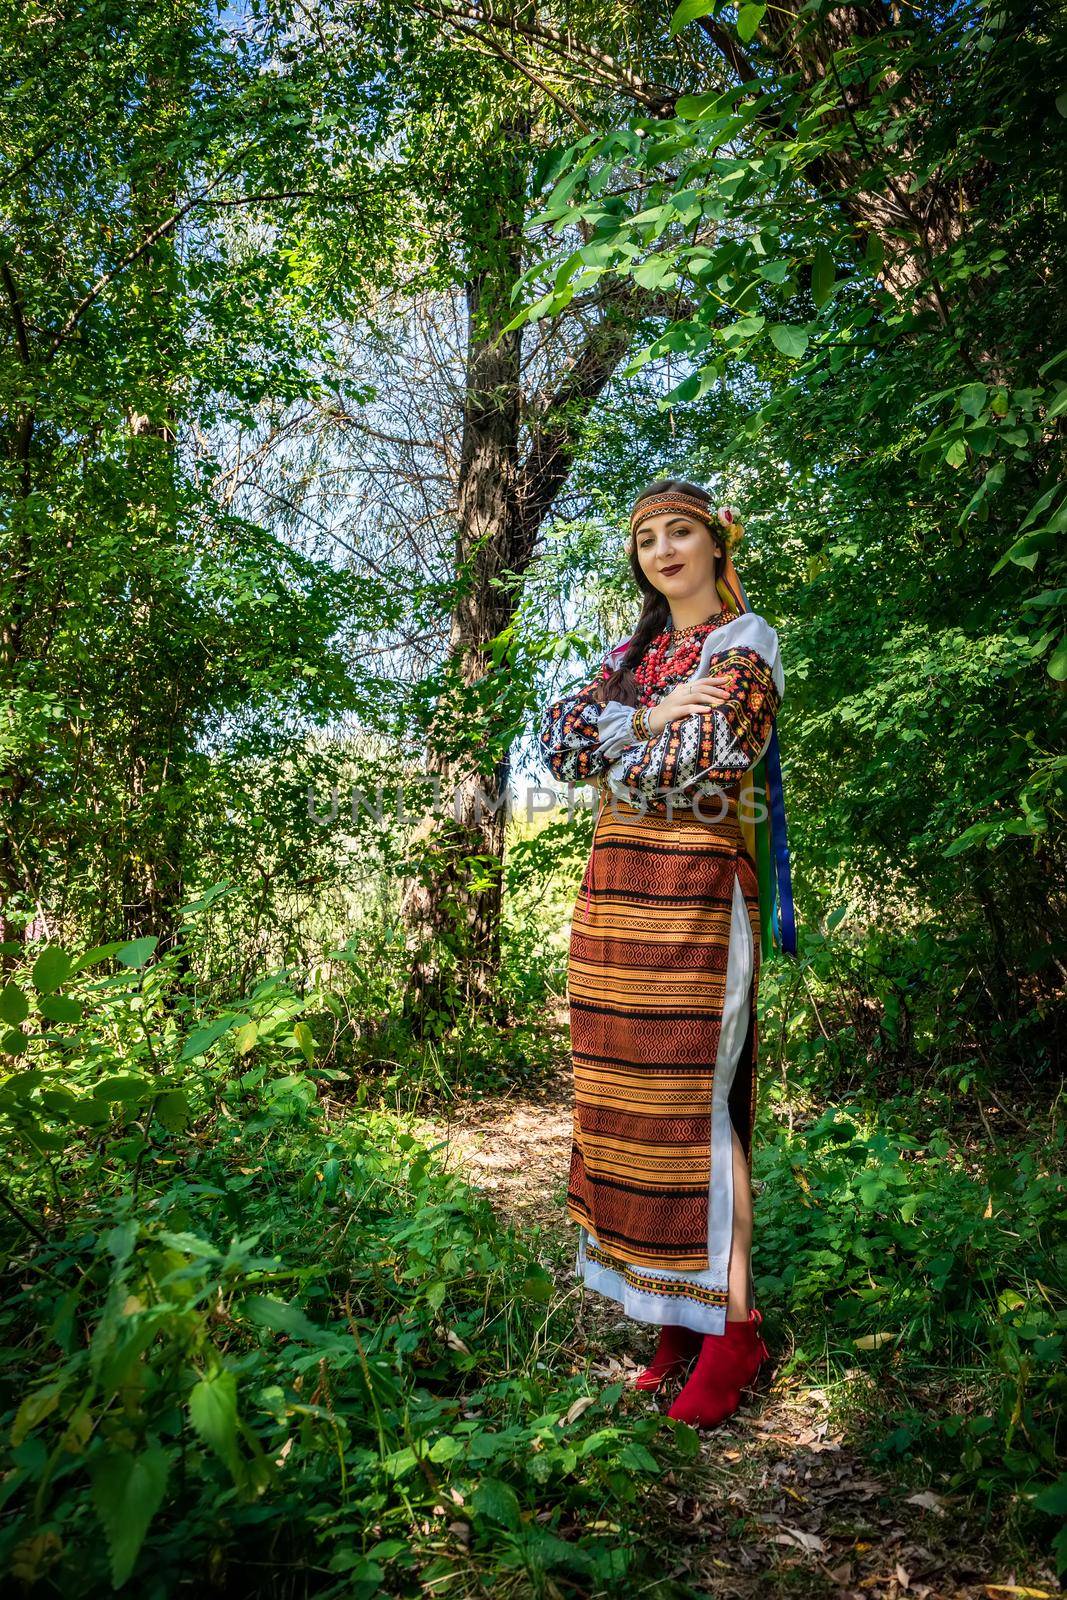 Ukrainian girl in national Ukrainian dress stands on a path in the woods.